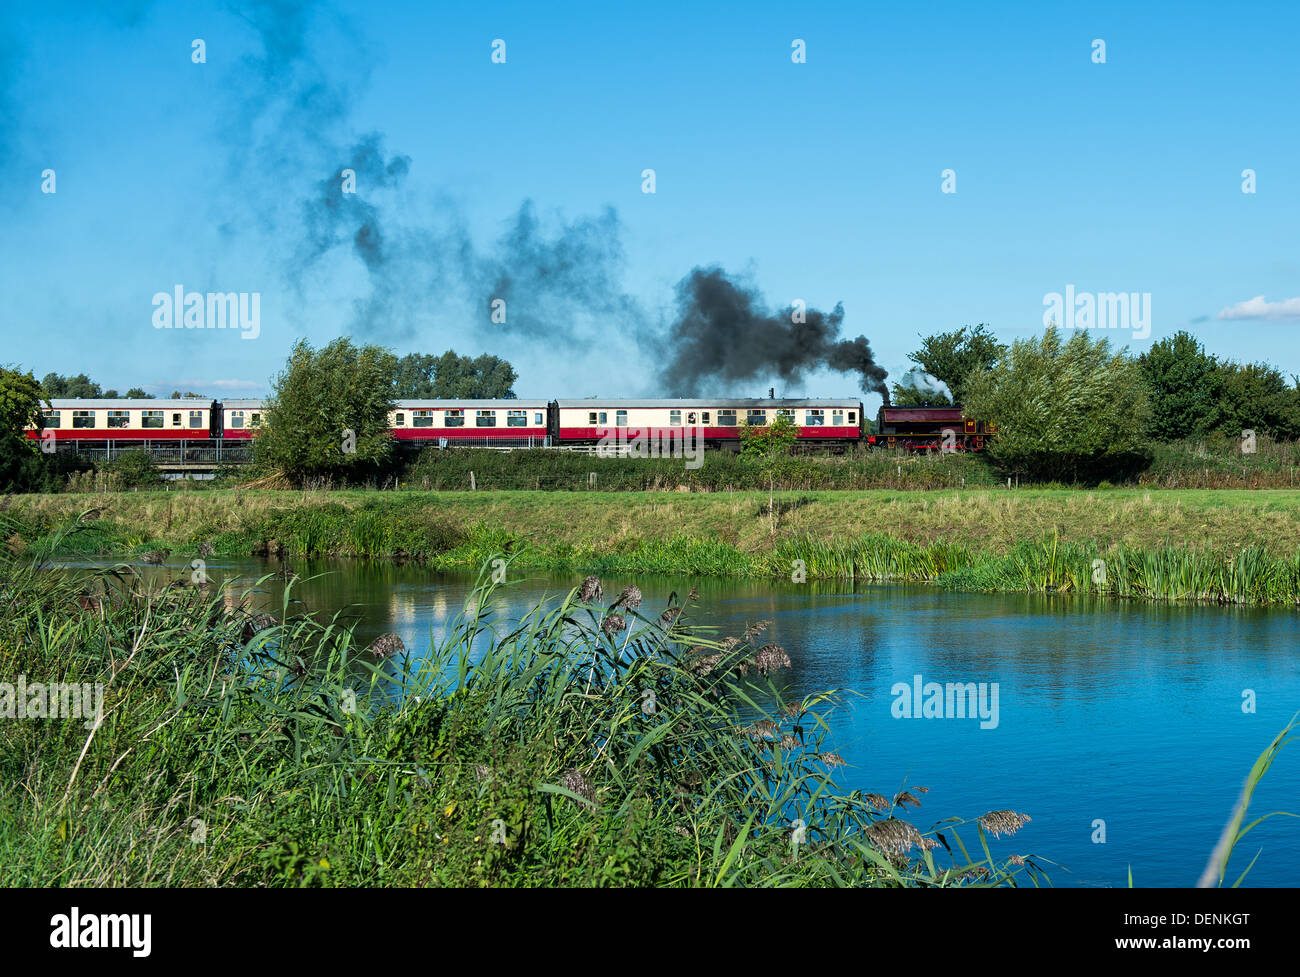 Nene Valley Railway train passes over the Nene river on a bright summers' day. Stock Photo